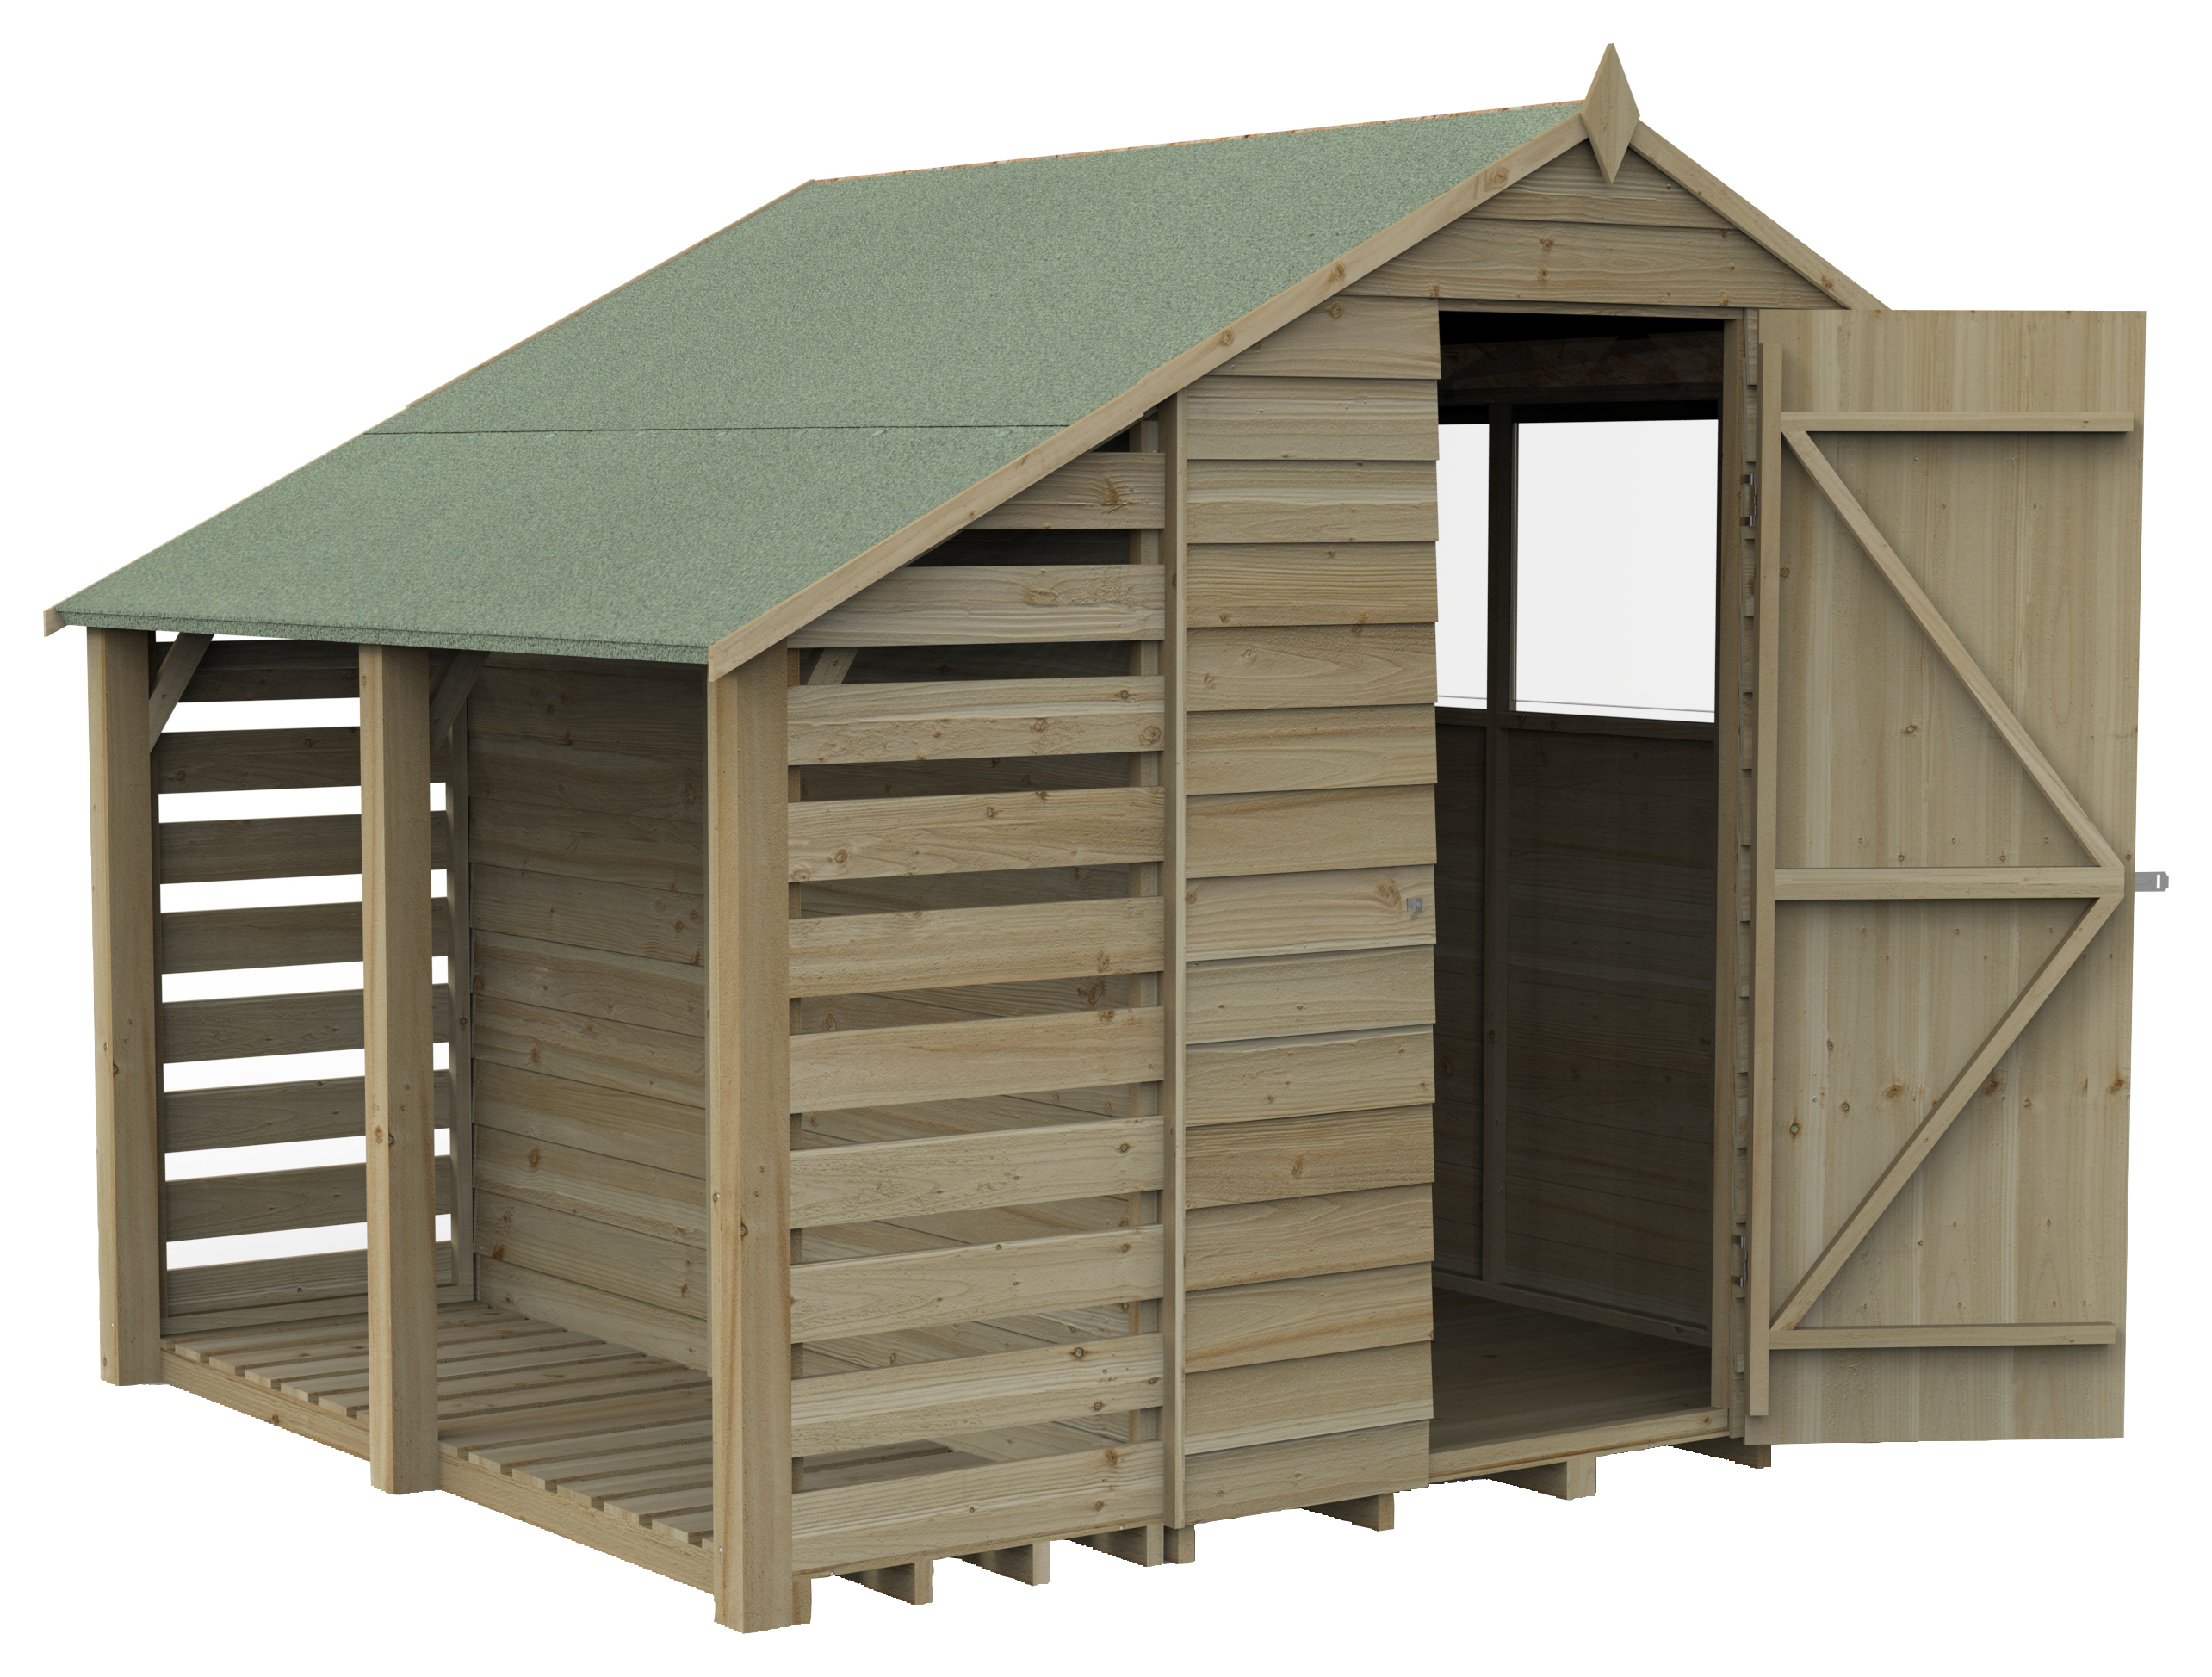 Image of Forest Garden 7 x 5ft 4Life Apex Overlap Pressure Treated Shed with Lean-To and Assembly